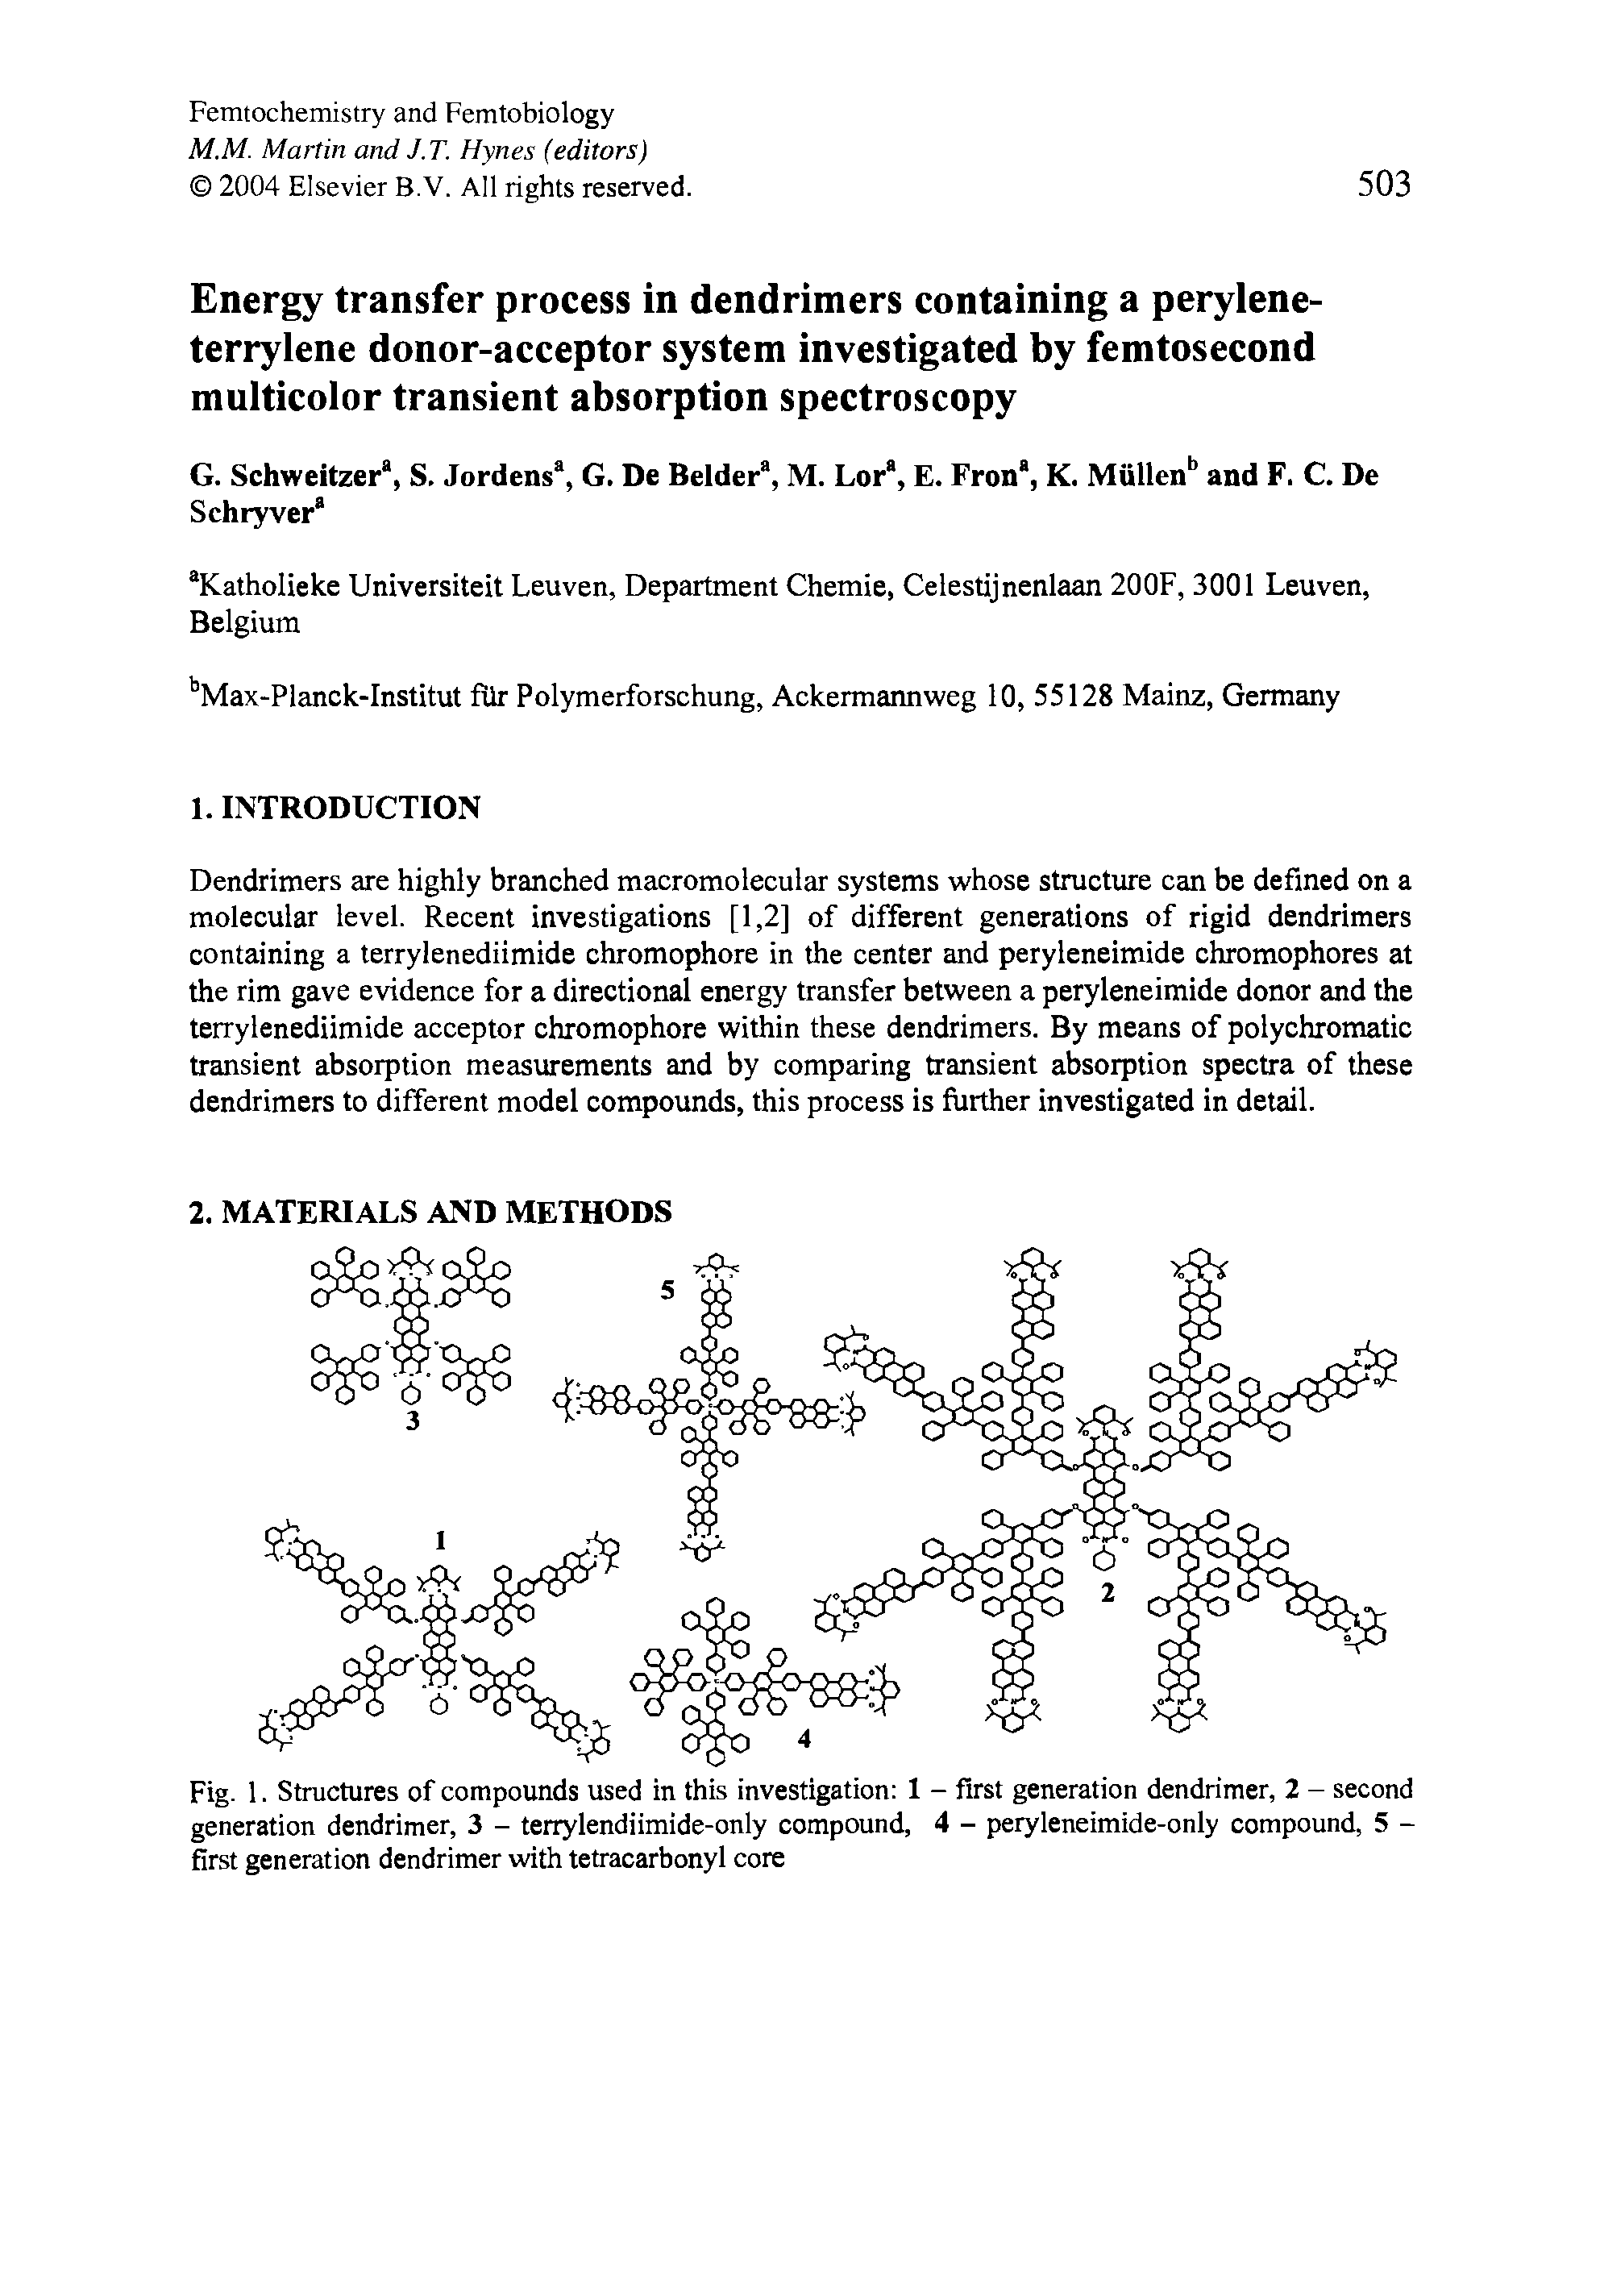 Fig. 1. Structures of compounds used in this investigation 1 - first generation dendrimer, 2 - second generation dendrimer, 3 - terrylendiimide-only compound, 4 - peryleneimide-only compound, 5 -first generation dendrimer with tetracarbonyl core...